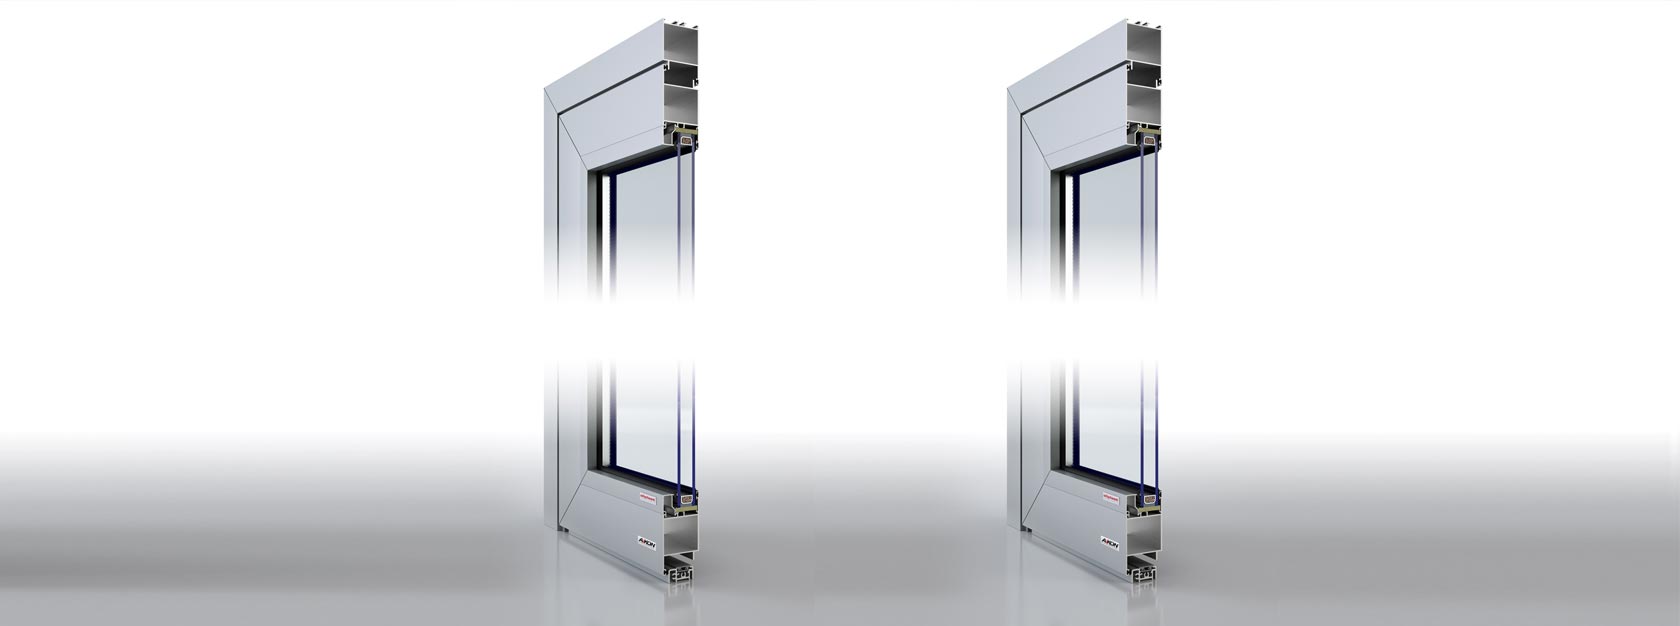 Econoline profile allows to manufacture sliding and double swing doors. 